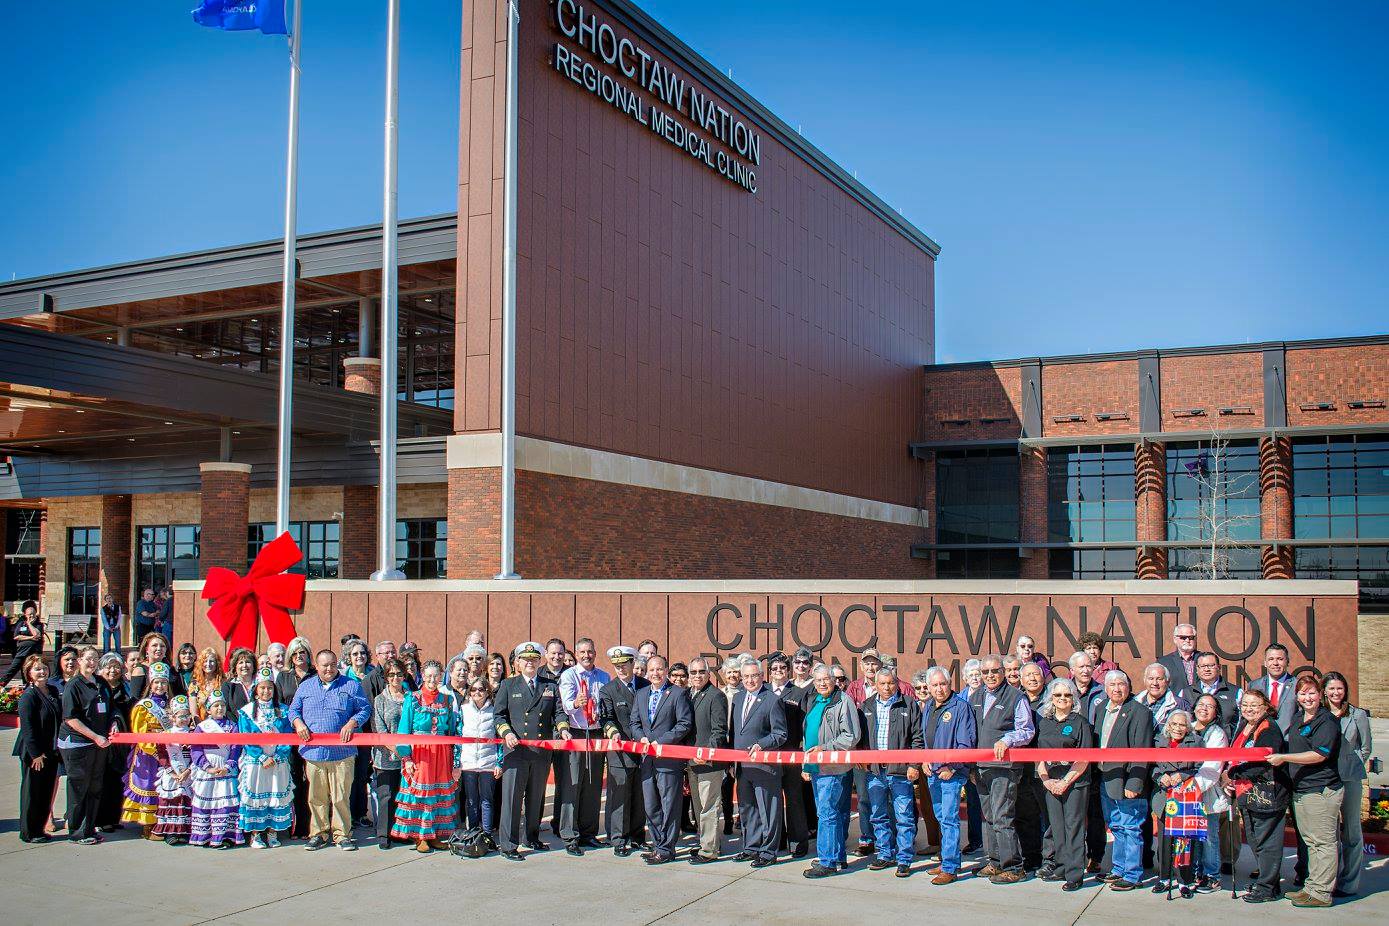 Choctaw Nation on a development boom with dozens of projects